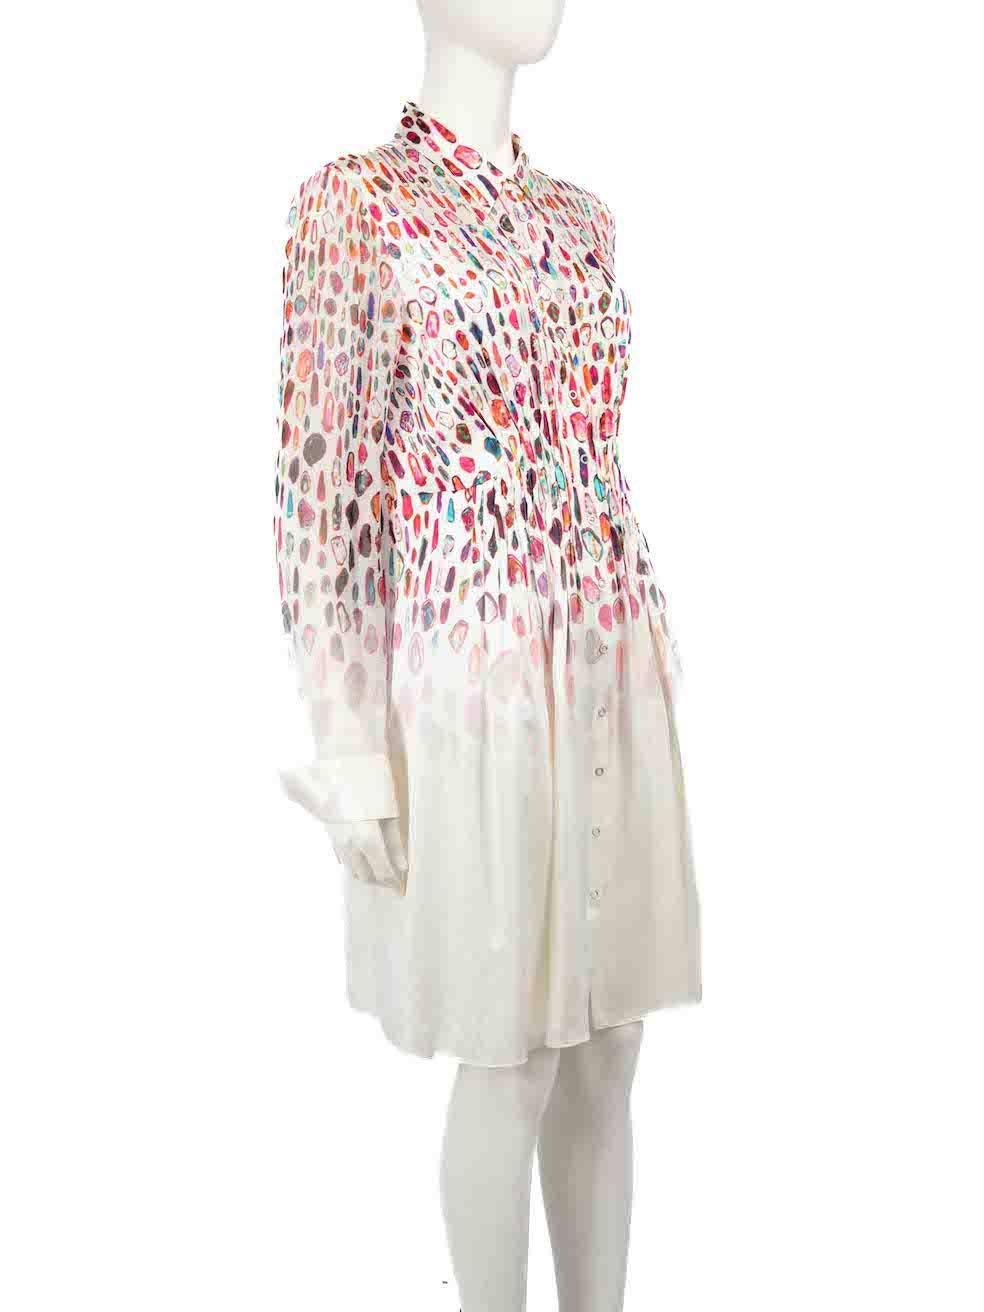 CONDITION is Very good. Minimal wear to dress is evident. Minimal wear to rear with small marks on this used Elie Tahari designer resale item.
 
 
 
 Details
 
 
 Multicolour- pink tone
 
 Silk
 
 Shirt dress
 
 Abstract pattern
 
 Long sleeves
 
